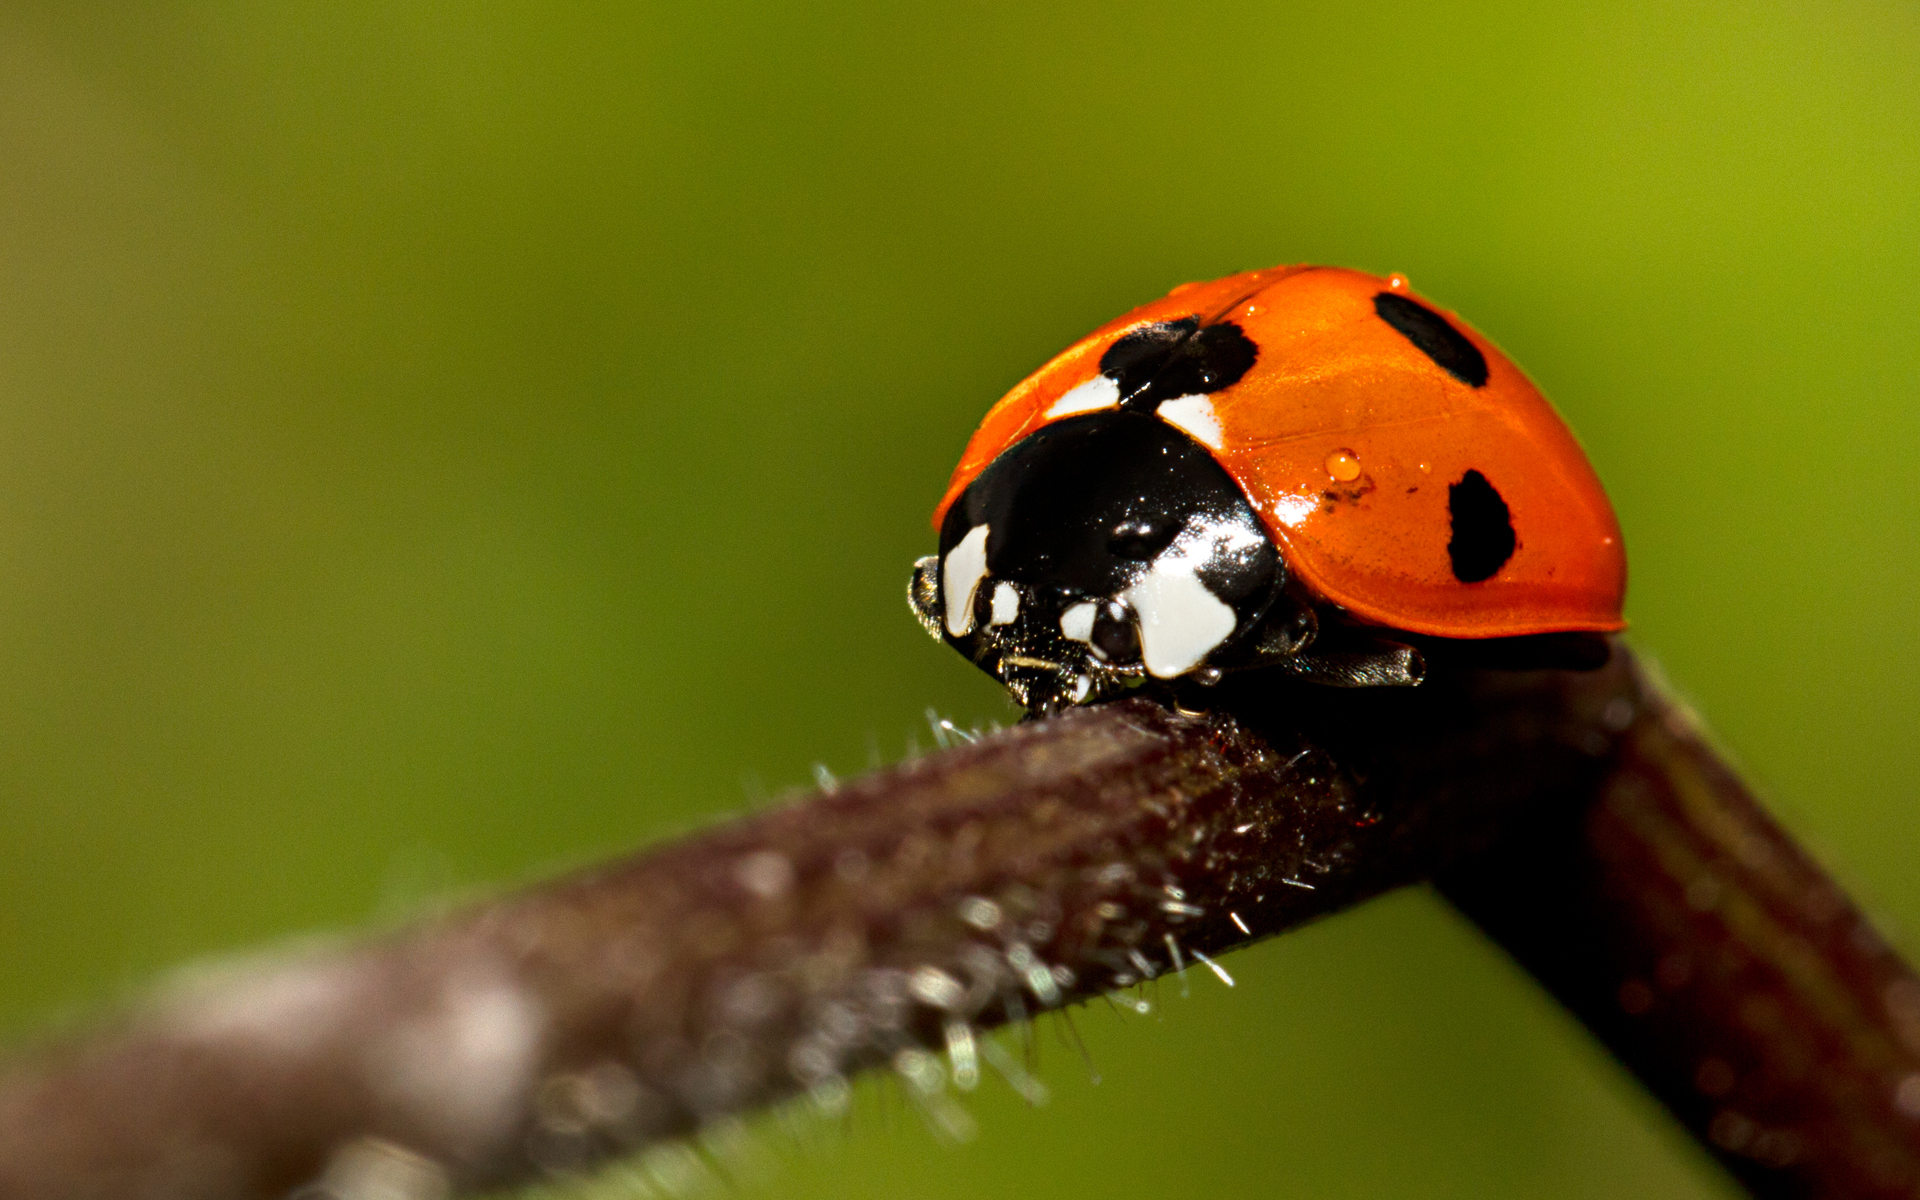 Ladybug Wallpapers Pictures Images HD Wallpapers Download Free Map Images Wallpaper [wallpaper376.blogspot.com]